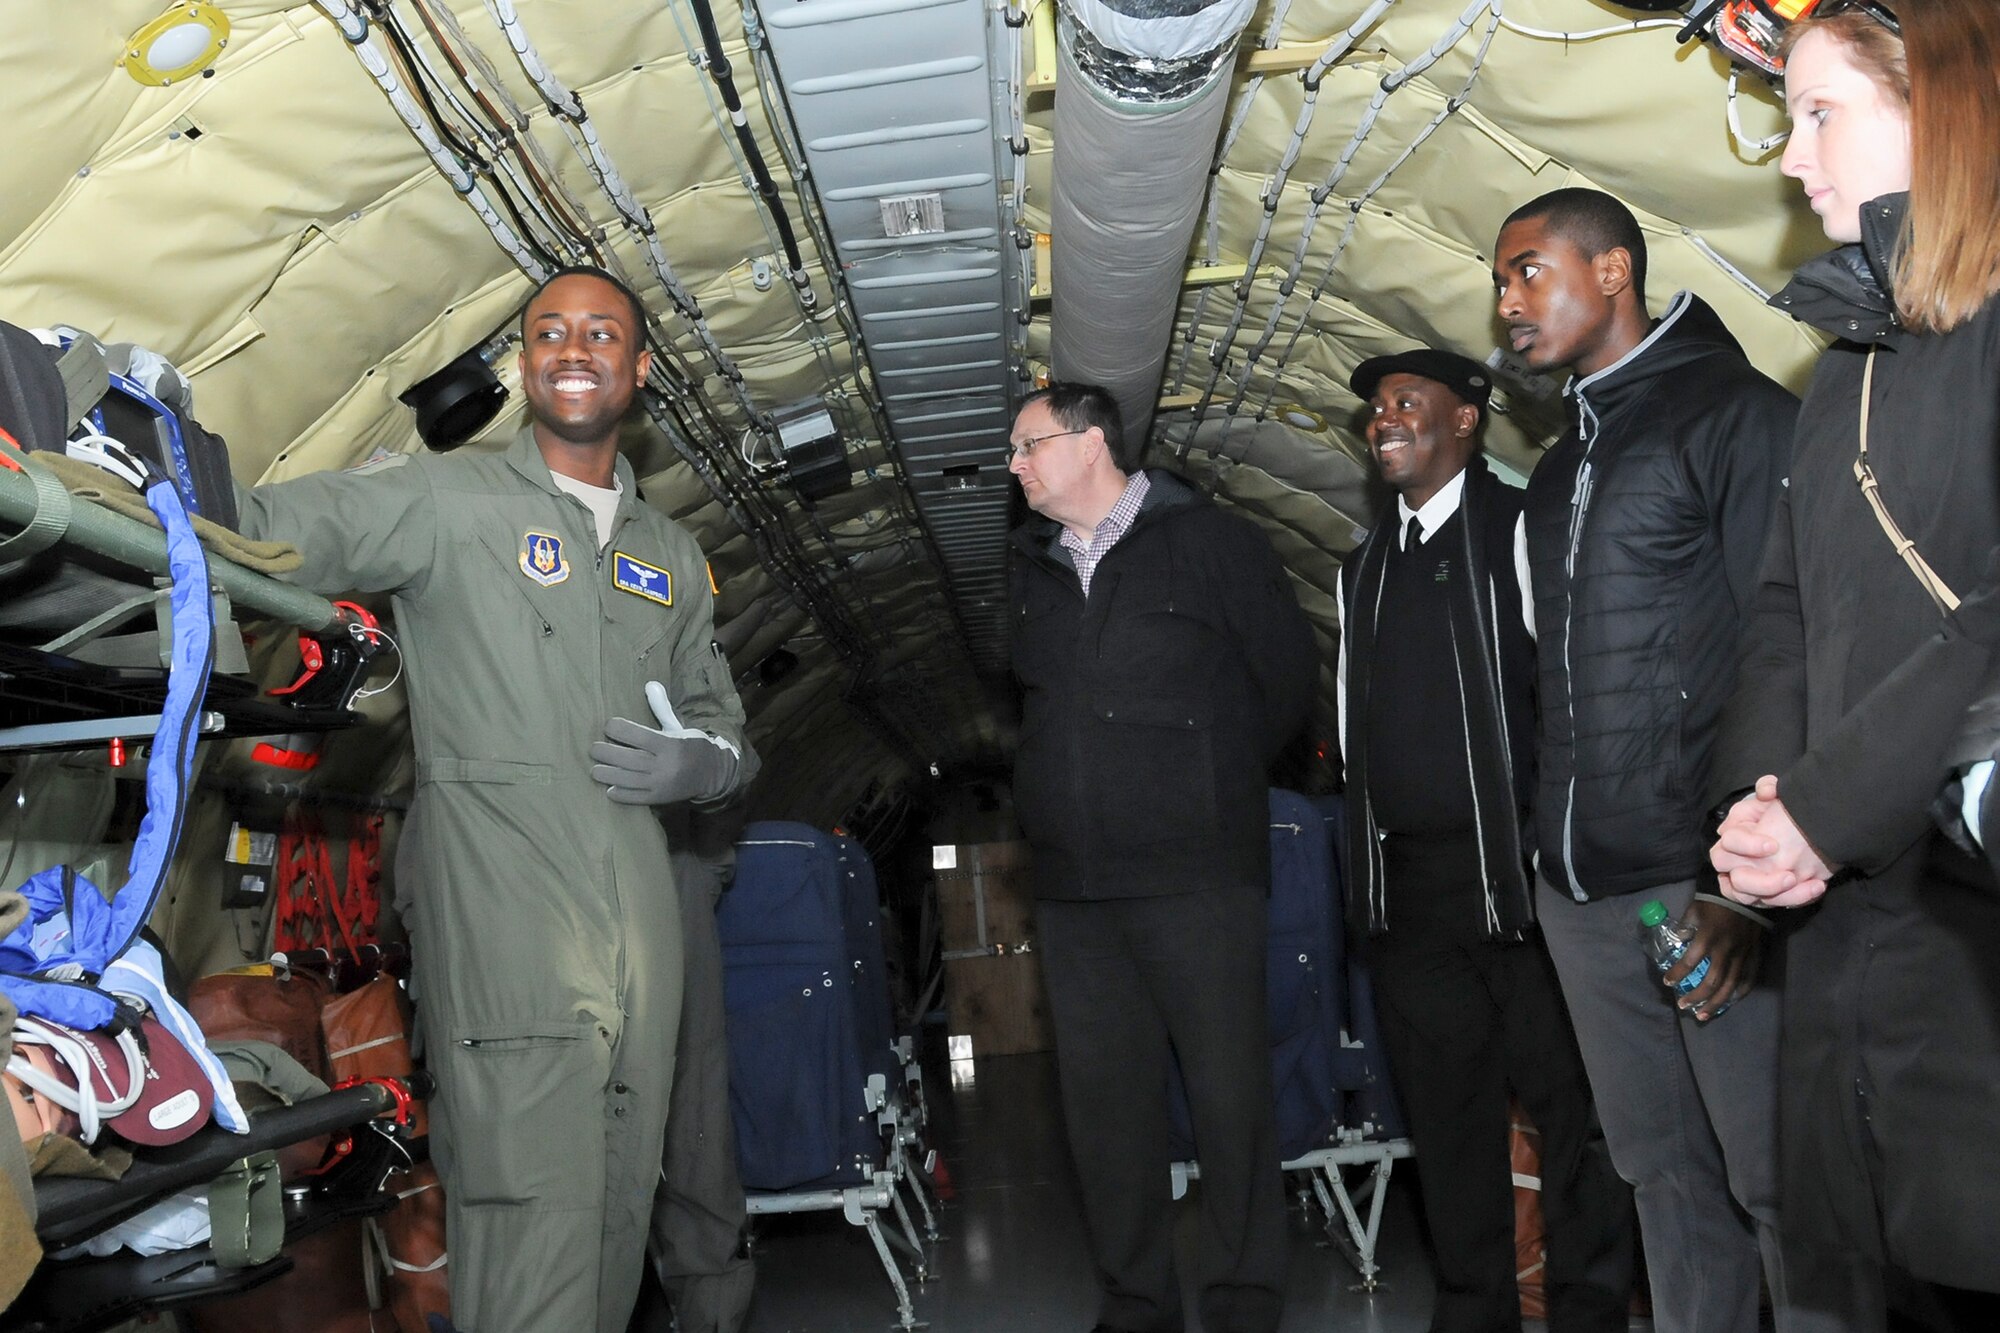 Senior Airman Kevin Campbell, 459th Aeromedical Evacuation Squadron aeromedical evacuation technician, illustrates his unit’s mission to a group of Baltimore Ravens staff members inside a KC-135R Stratotanker during a tour on the Joint Base Andrews, Maryland, flight line March 7, 2016. The 459th also showcased missions such as inflight refueling, maintenance and aerial porting. (U.S. Air Force photo/Staff Sgt. Kat Justen)